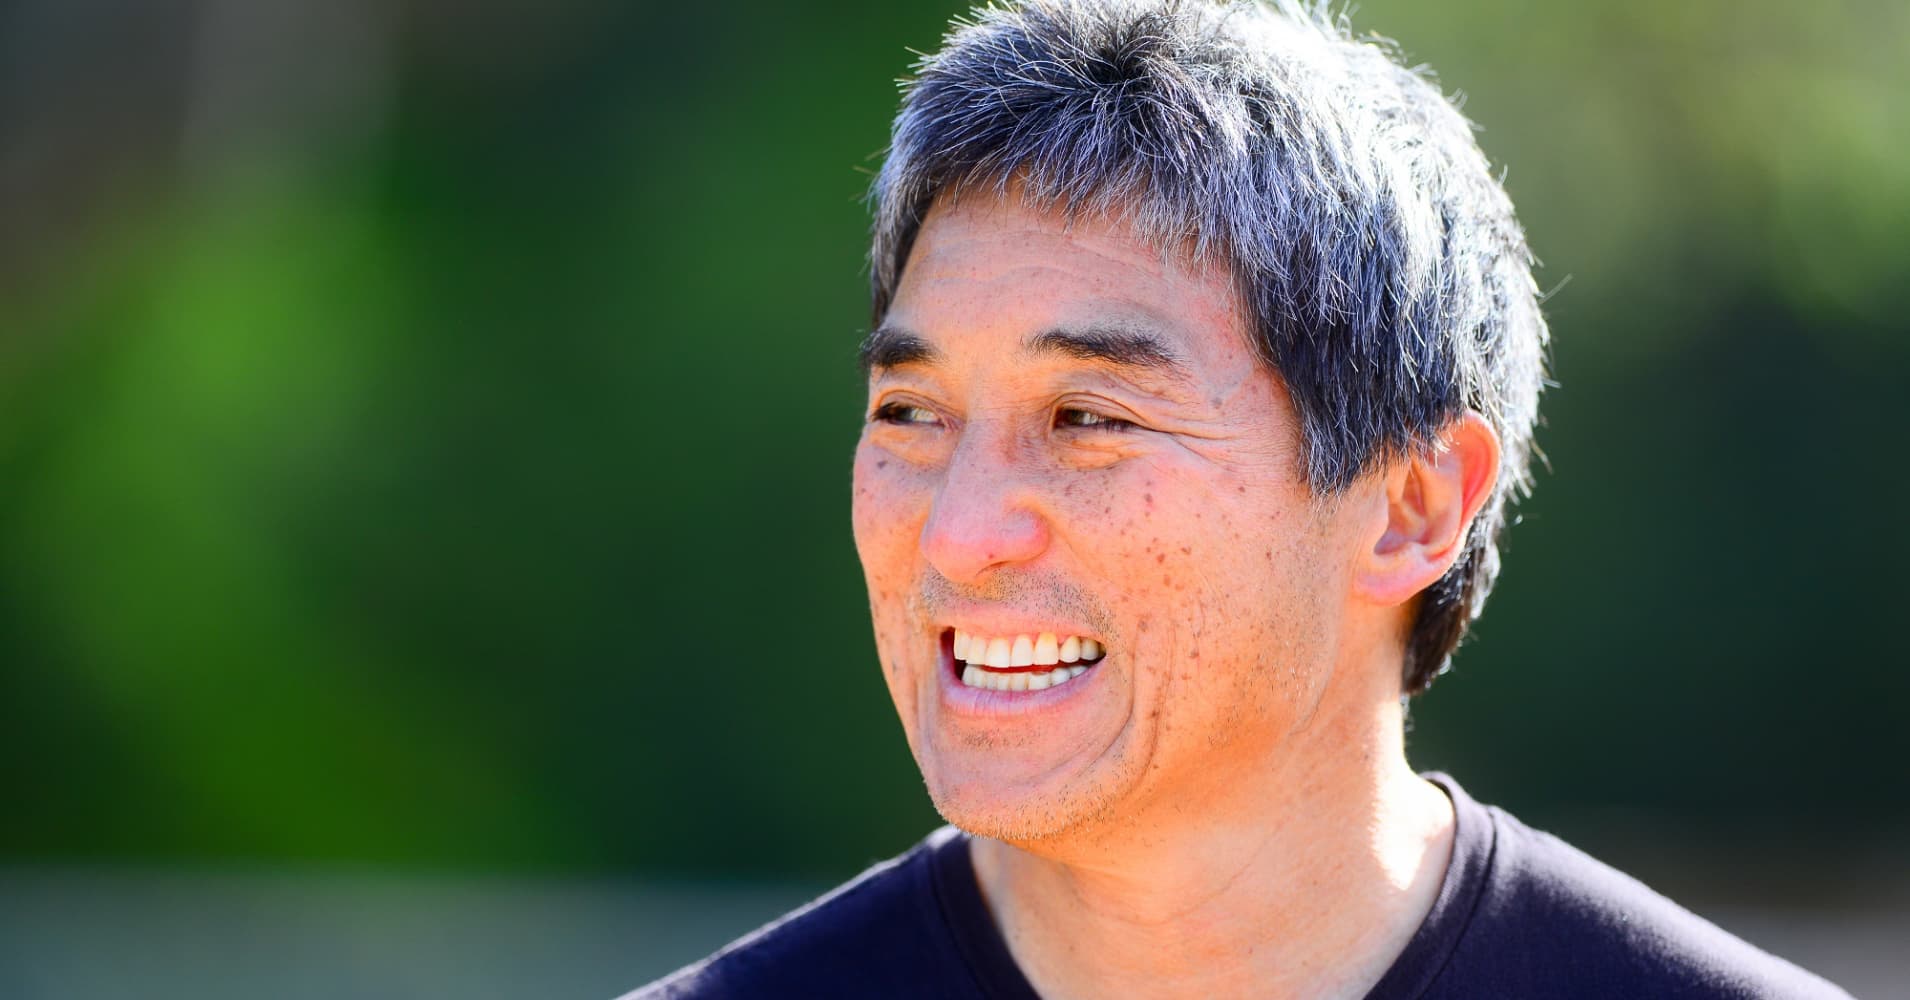 What Guy Kawasaki learned from quitting law school after 2 weeks